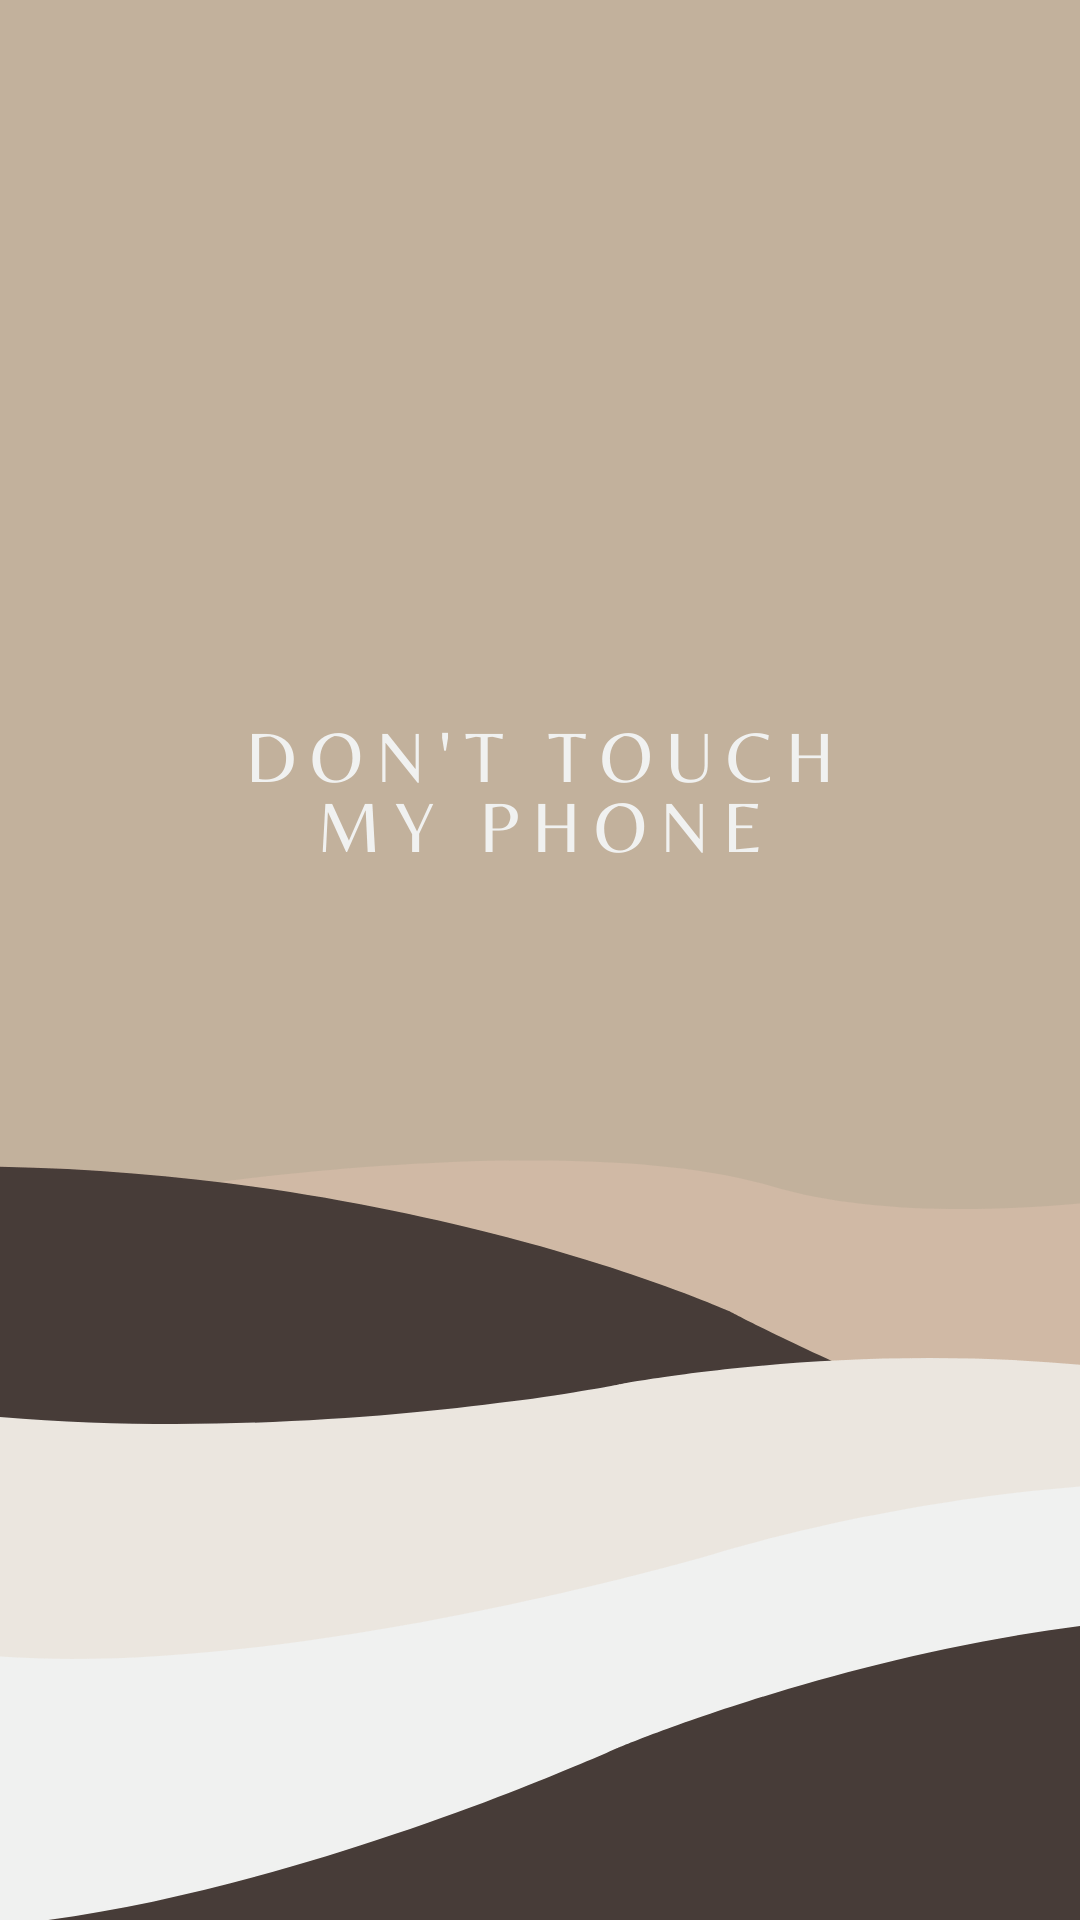 A poster that says don't touch my phone - Don't touch my phone